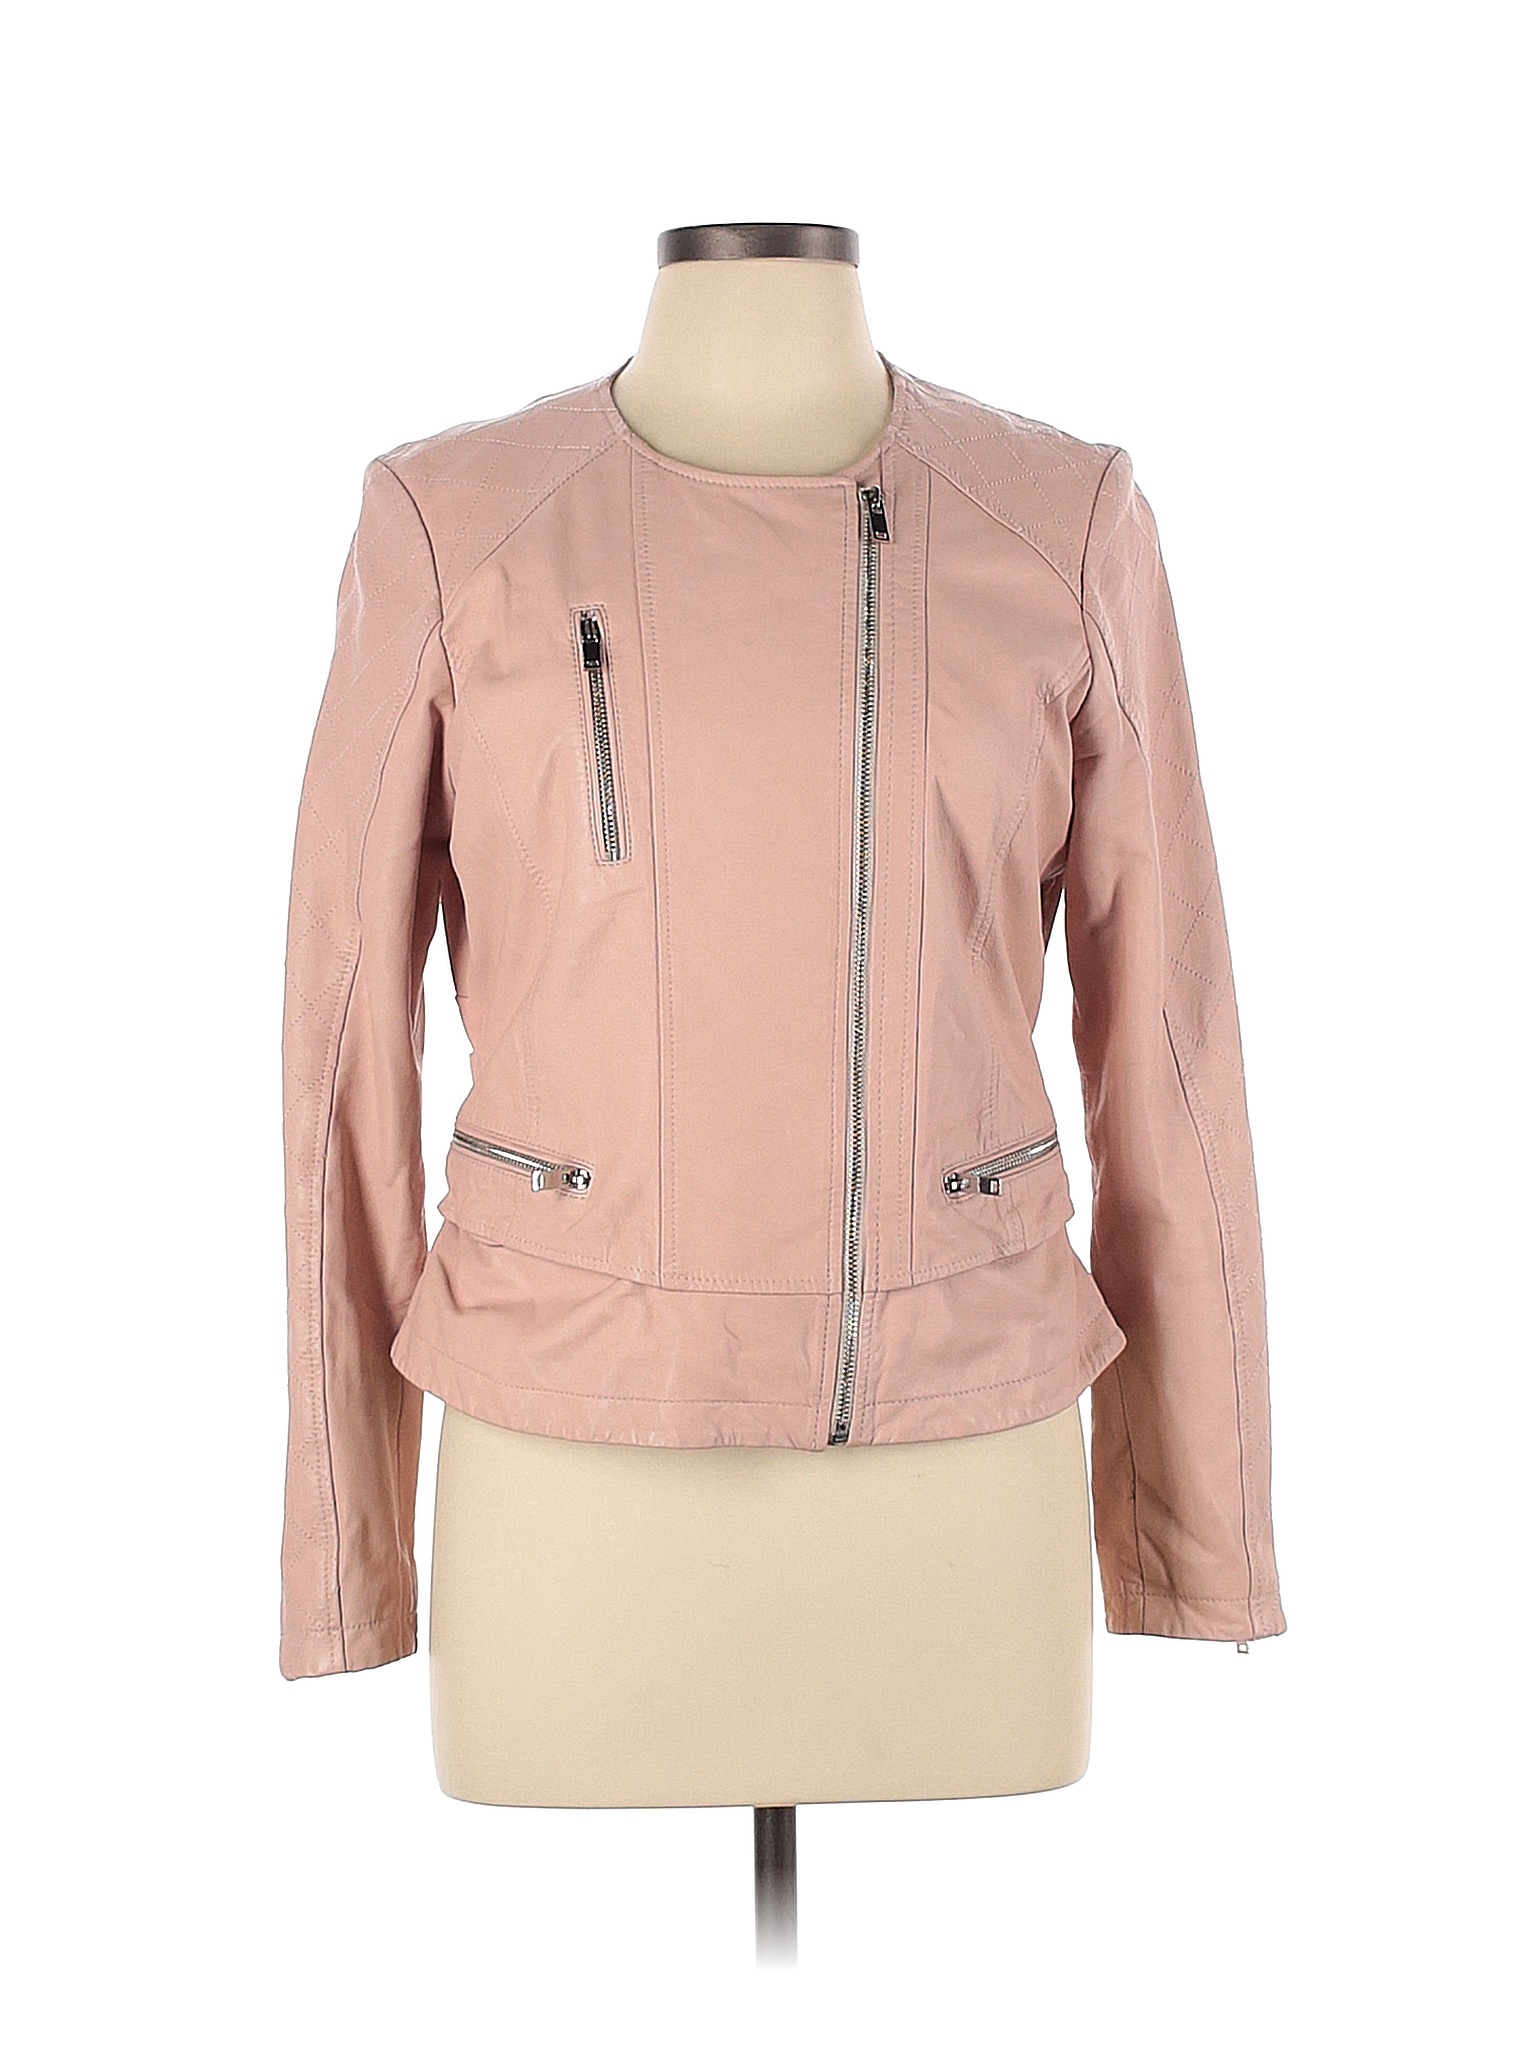 Slate & Willow 100% Leather Solid Colored Pink Quilted Collarless Moto  Jacket Size L - 80% off